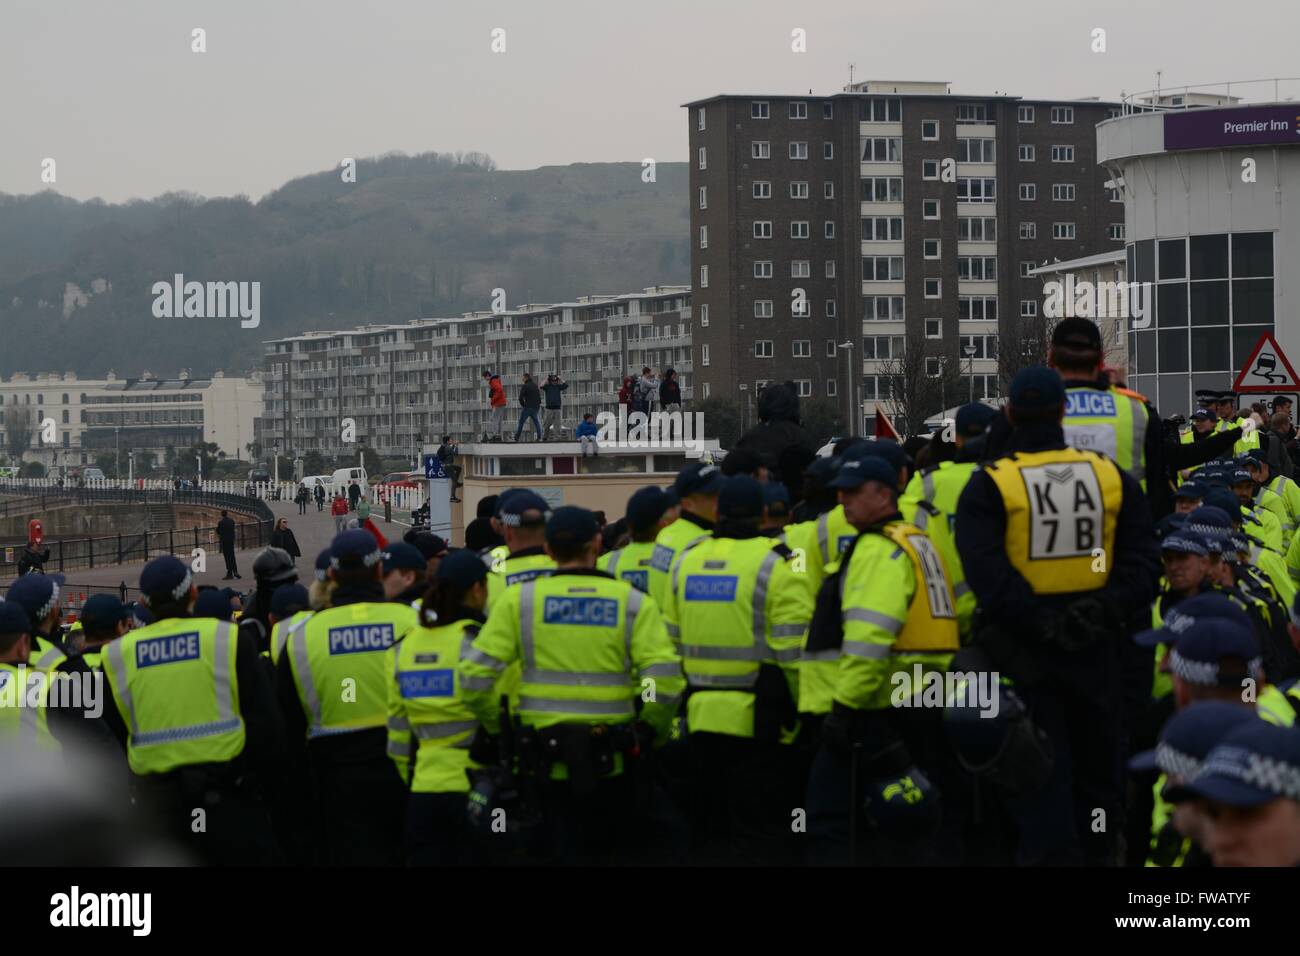 Dover, UK. 2nd April 2016. Clashes As Pro and Anti-refugee groups clash in Dover.  Youths can be seen climbing buildings as police contain protesters on the seafront. Credit: Marc Ward/Alamy Live News Stock Photo